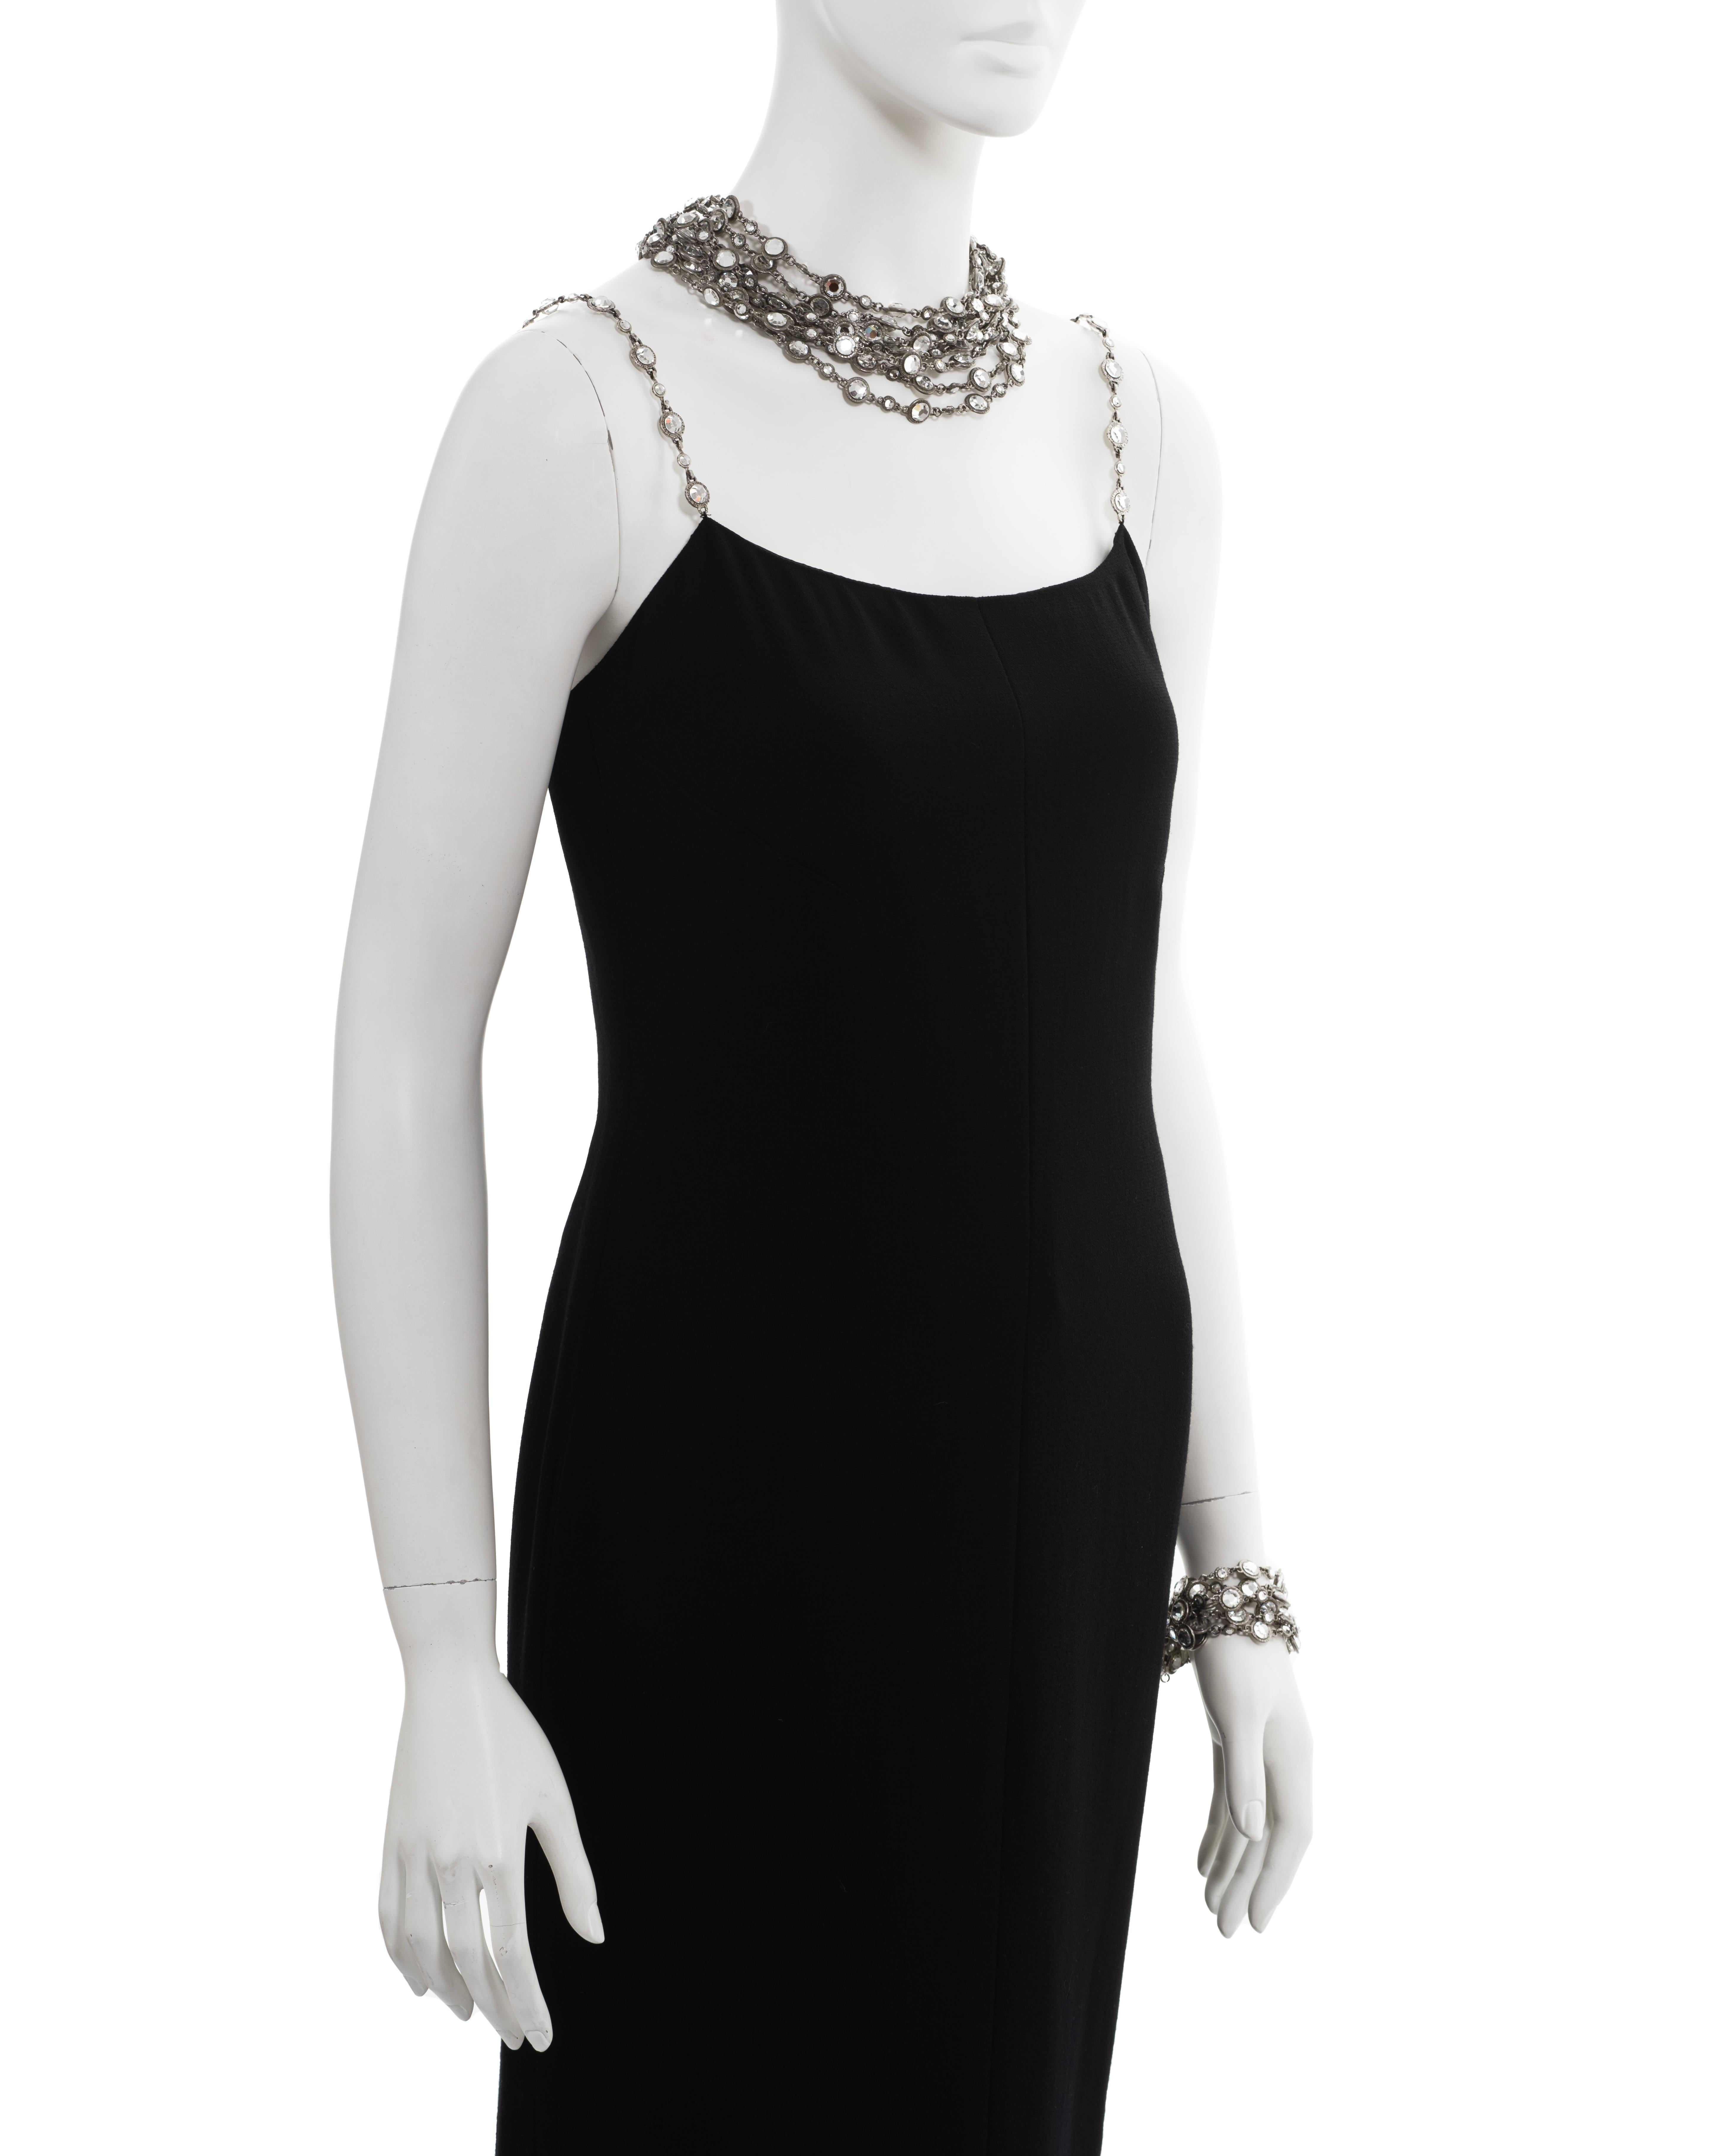 Chanel by Karl Lagerfeld black evening dress with crystal jewellery set, ss 1998 For Sale 5